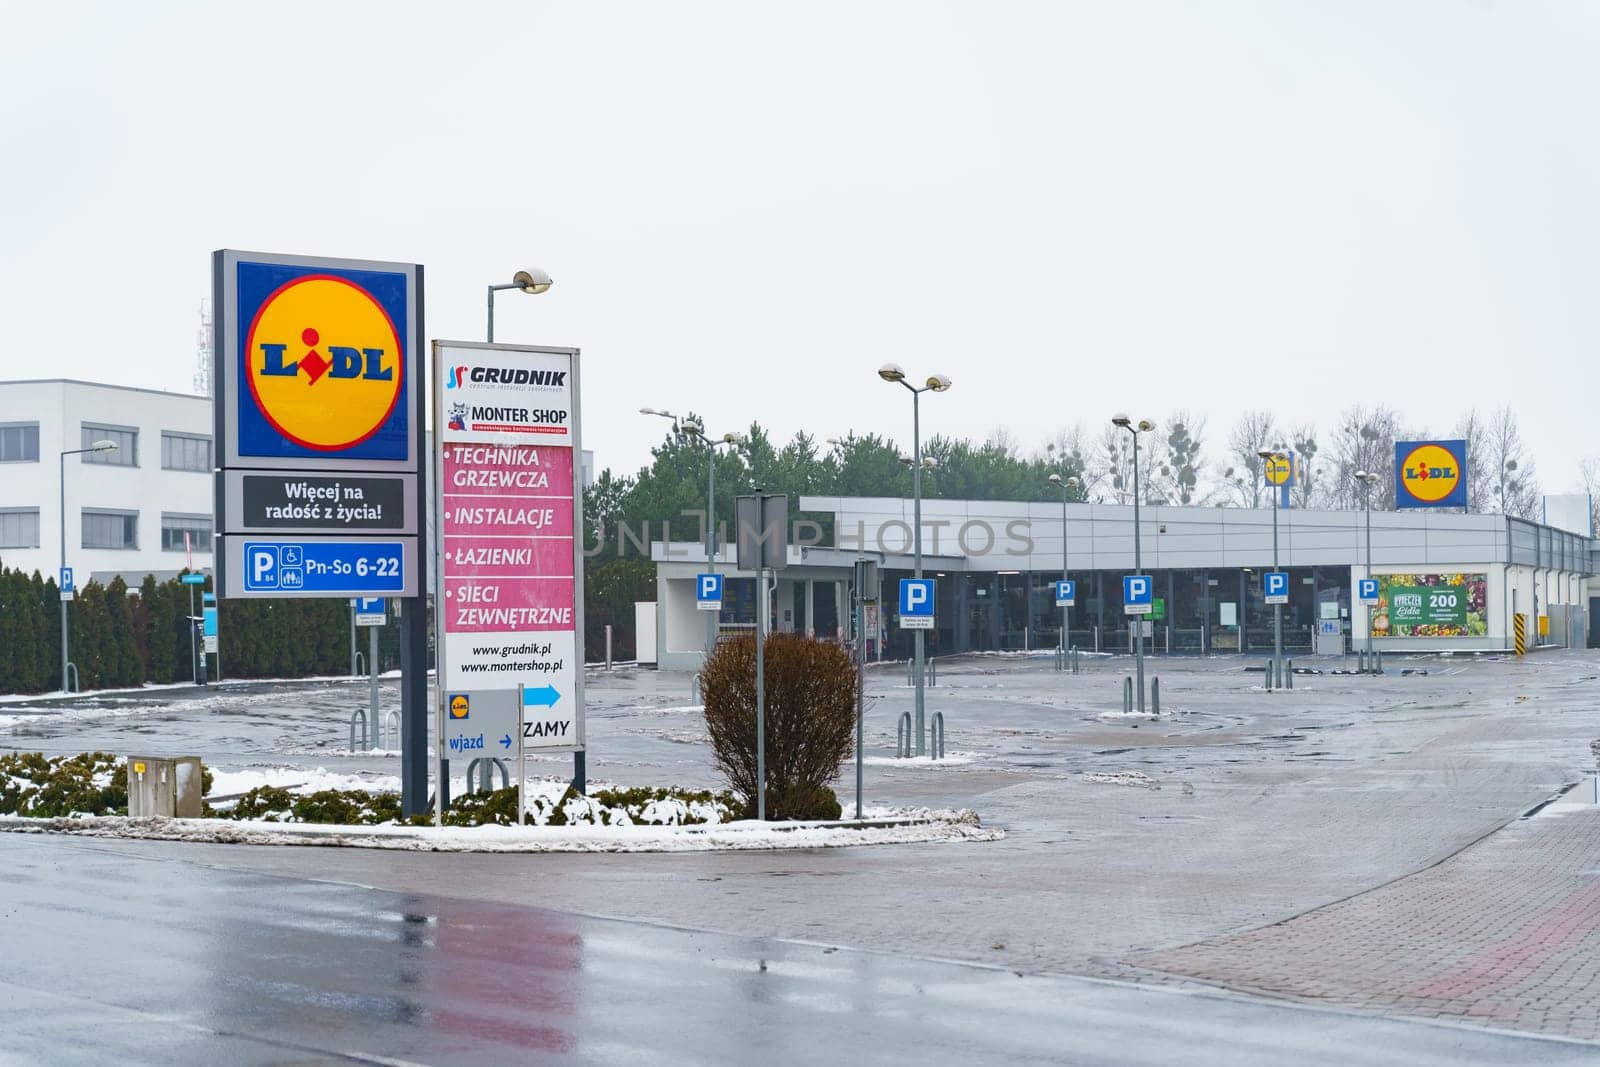 Empty parking lot in front of Lidl store. The supermarket is closed, Sunday. by Sd28DimoN_1976